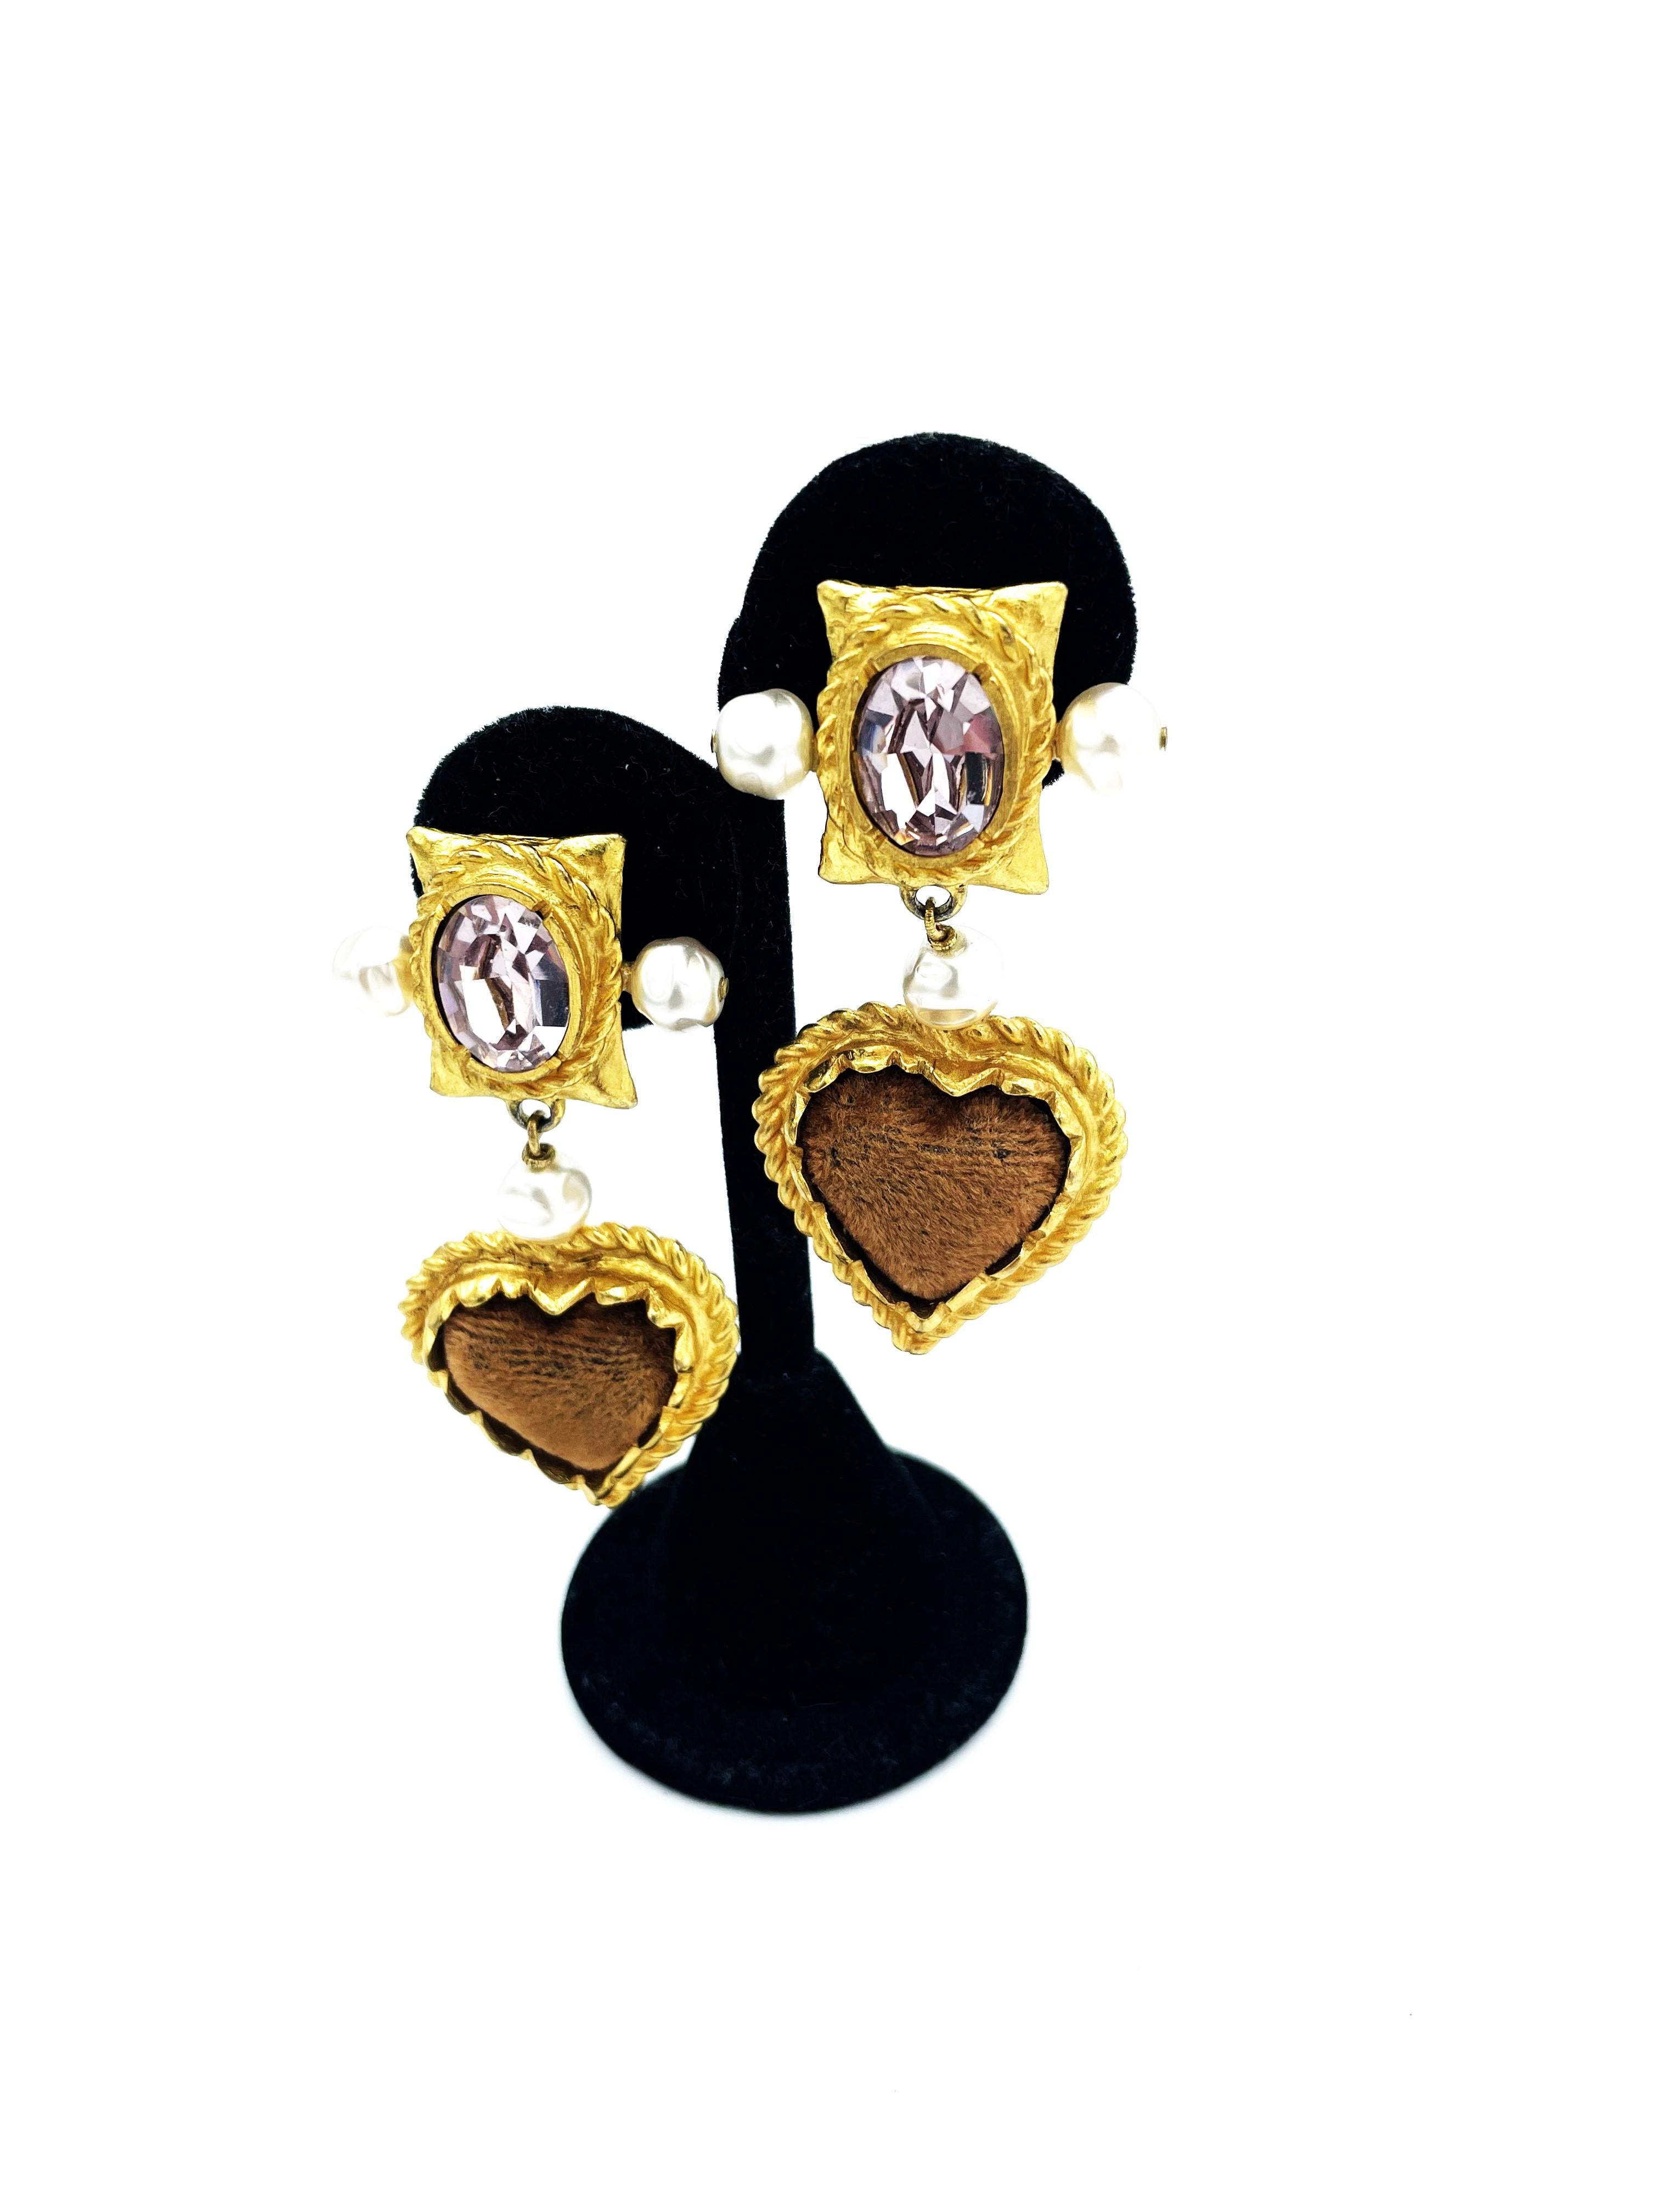 About
Hanging ear clip by Ch. Lacroix Paris consisting of 2 parts. The upper part with a large, slightly lavender colored cut rhinestone with 2 handmade pearls on the site. Hanging on it are 1 pearl and a gold heart bordered with a cord and filled